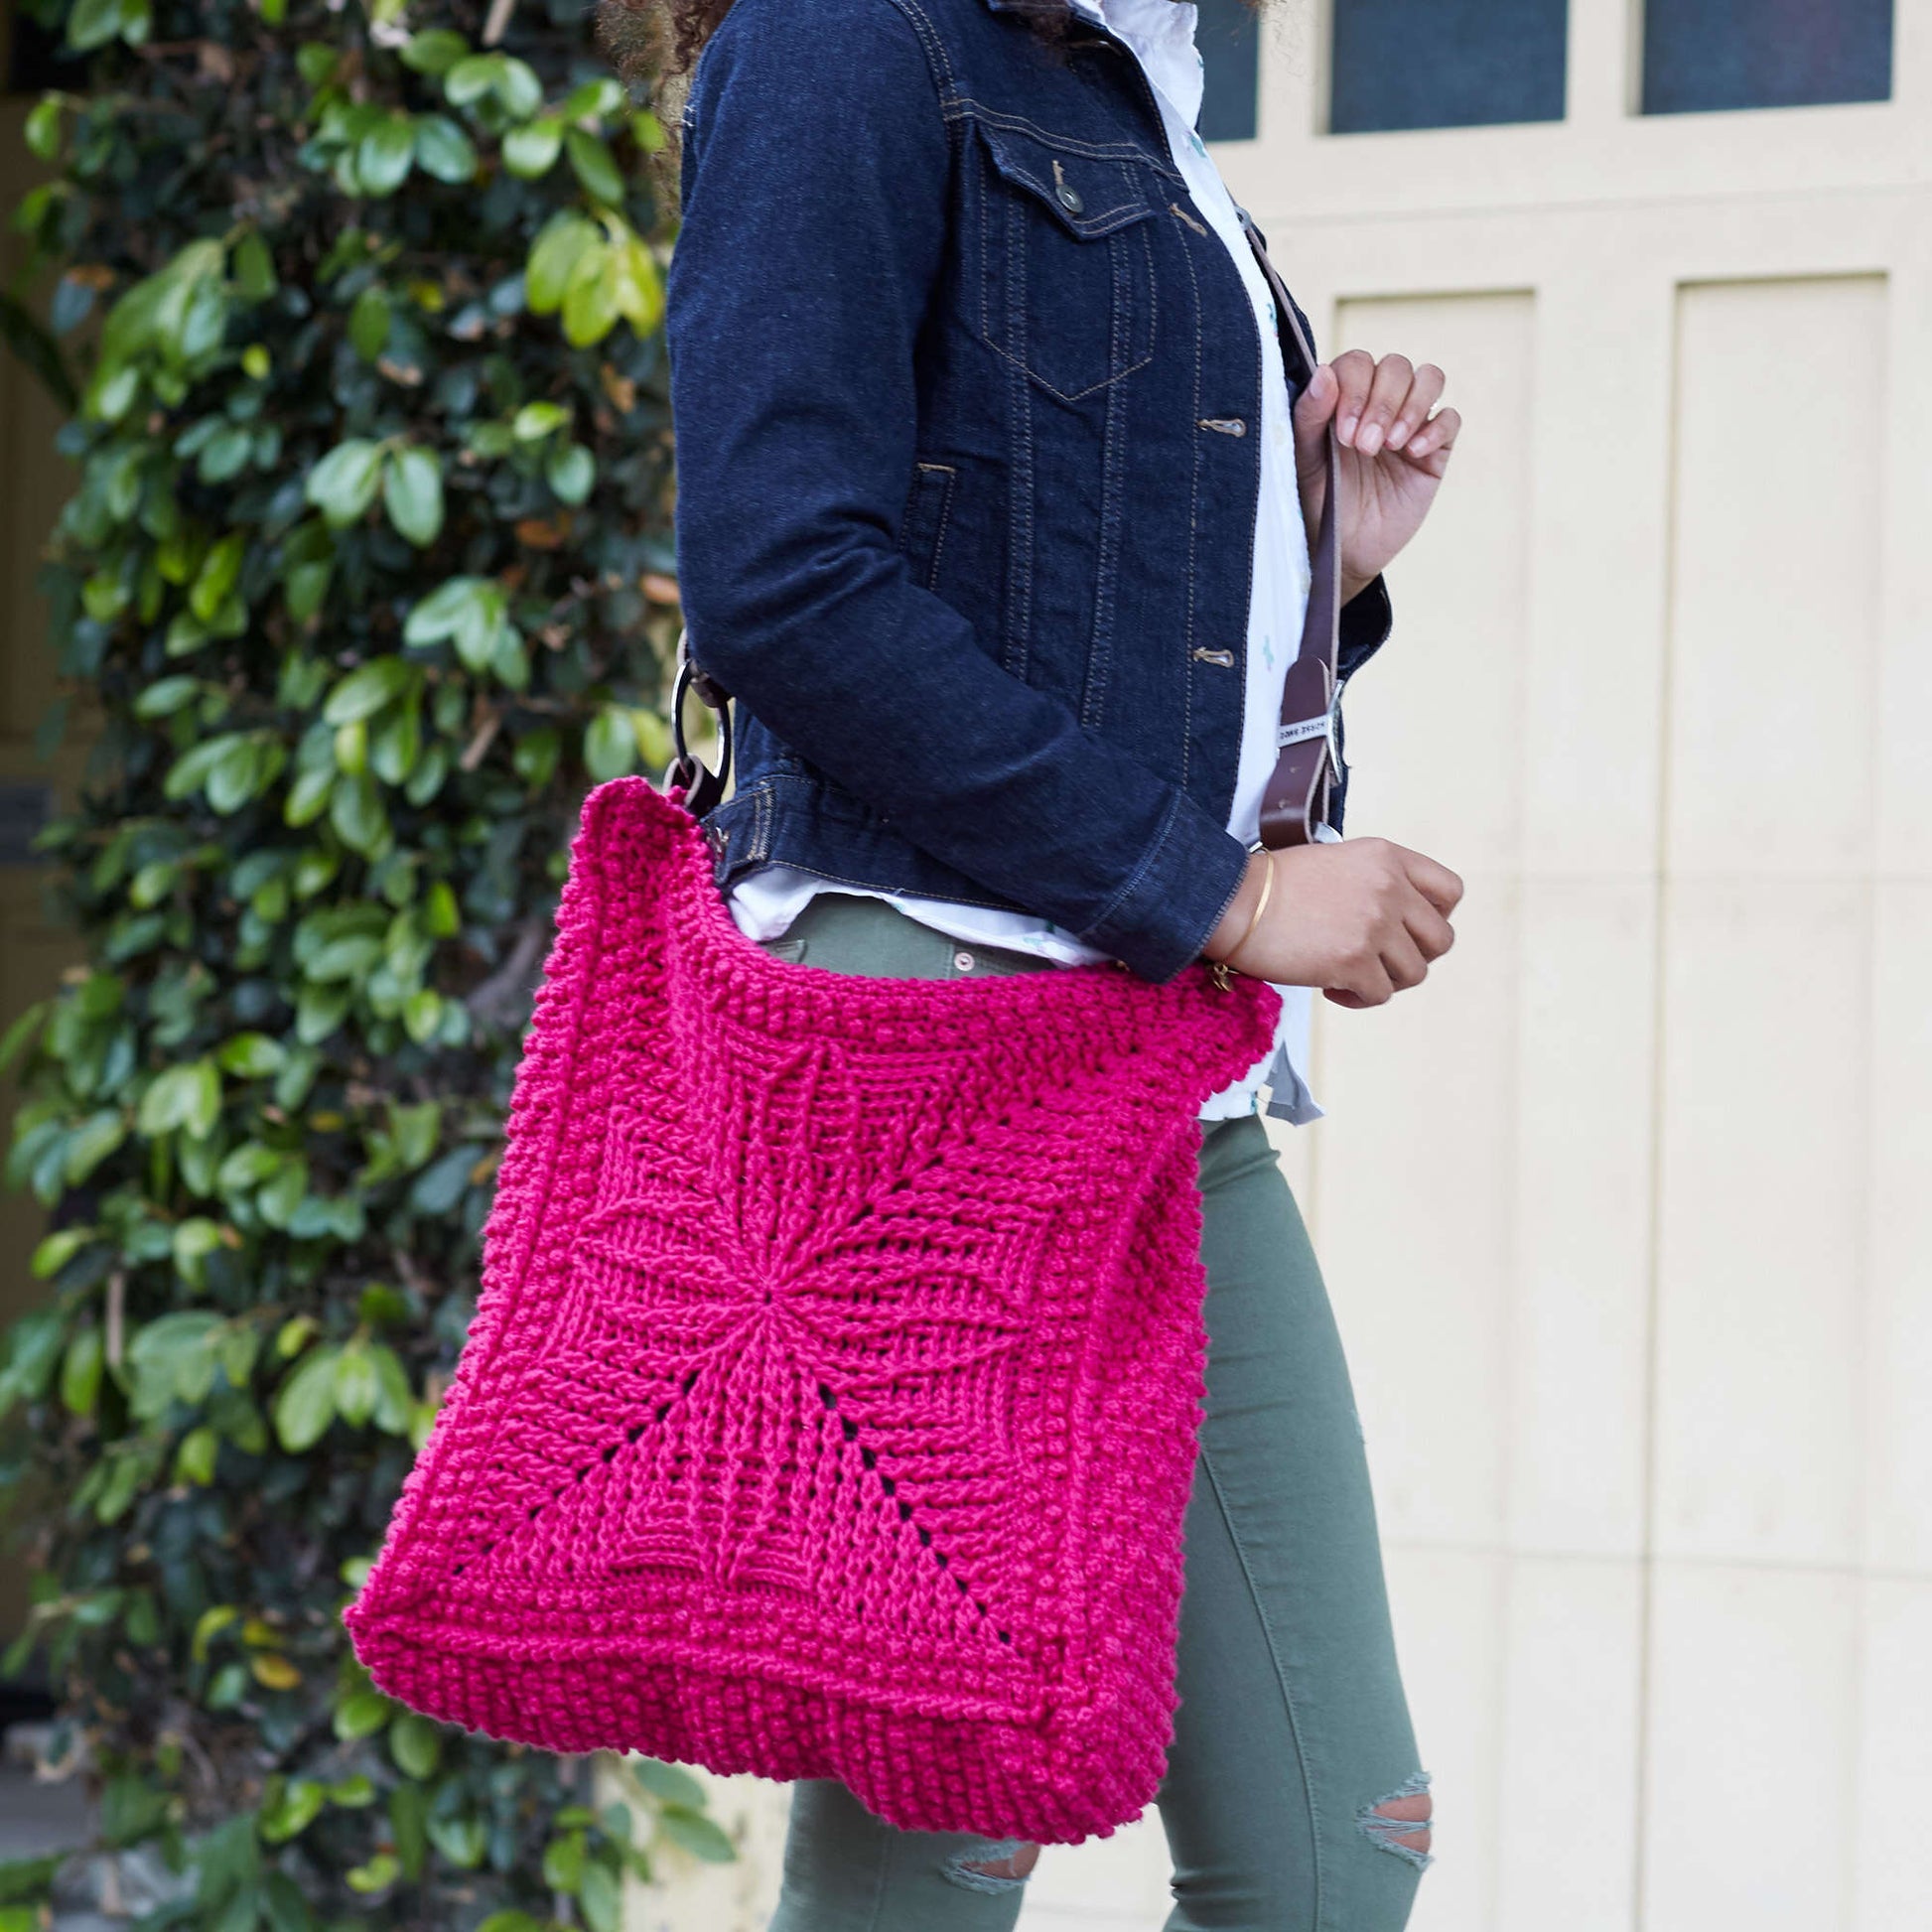 Free Red Heart Chic Carry-all Bag Crochet Pattern